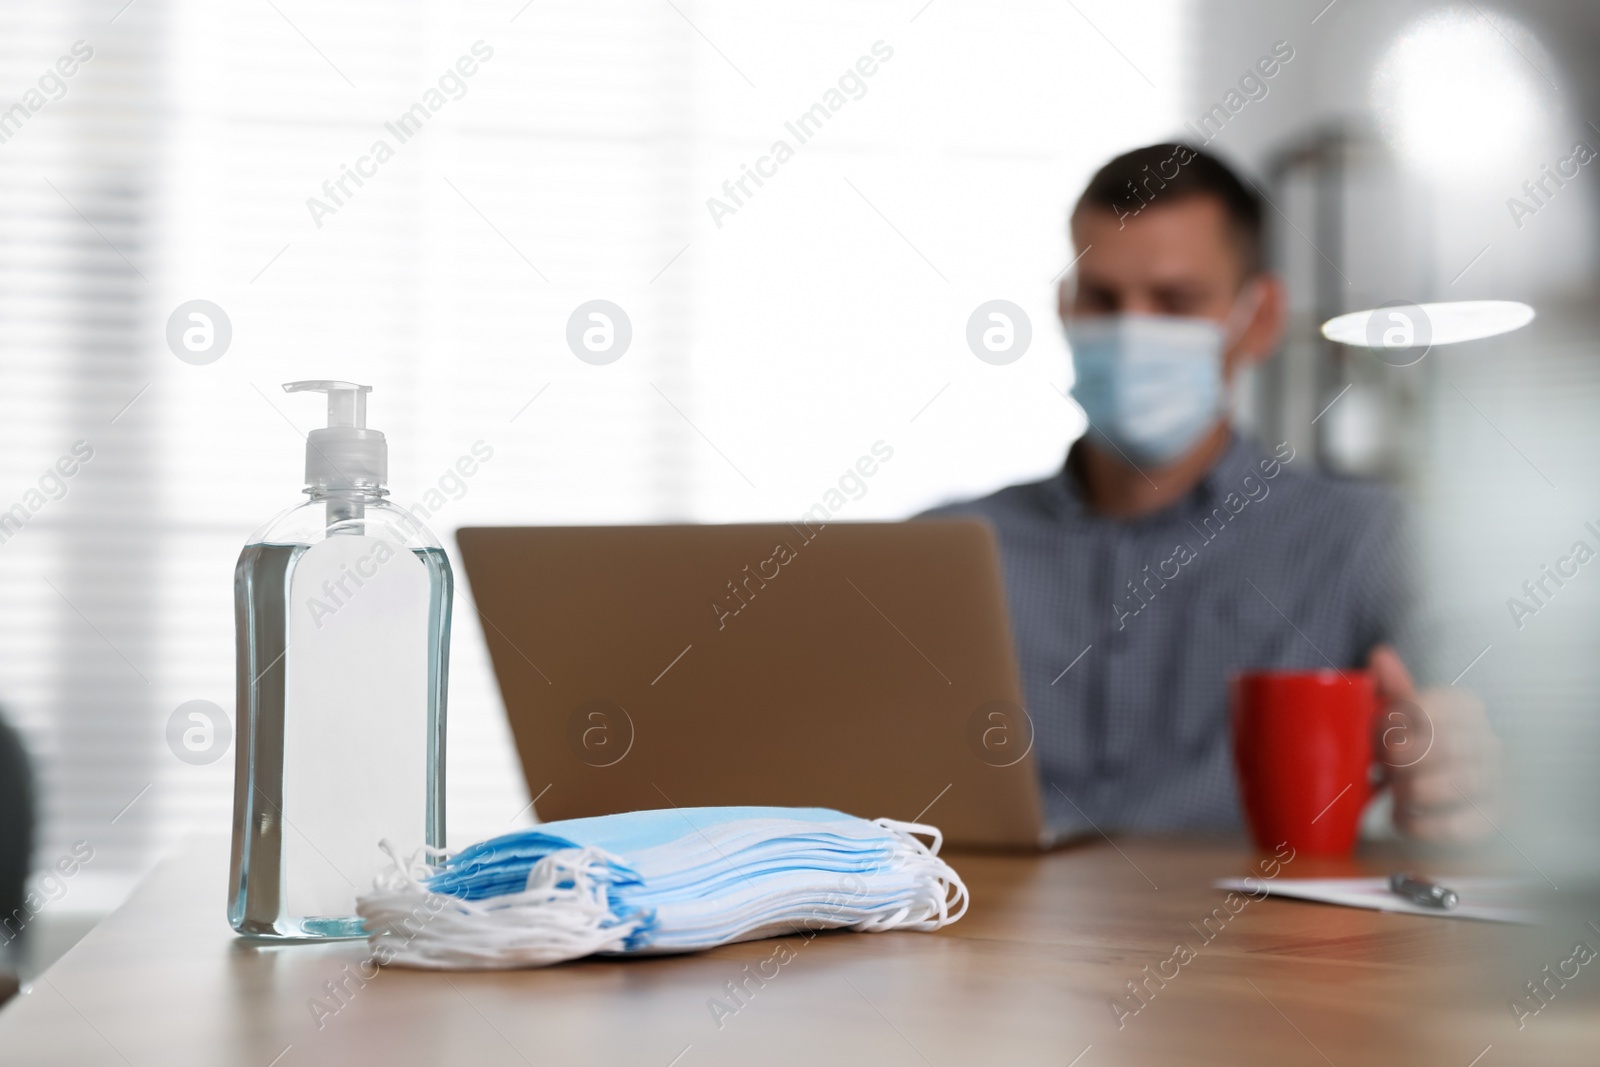 Photo of Hand sanitizer, masks and blurred view of office worker on background. Protective measures during COVID-19 pandemic